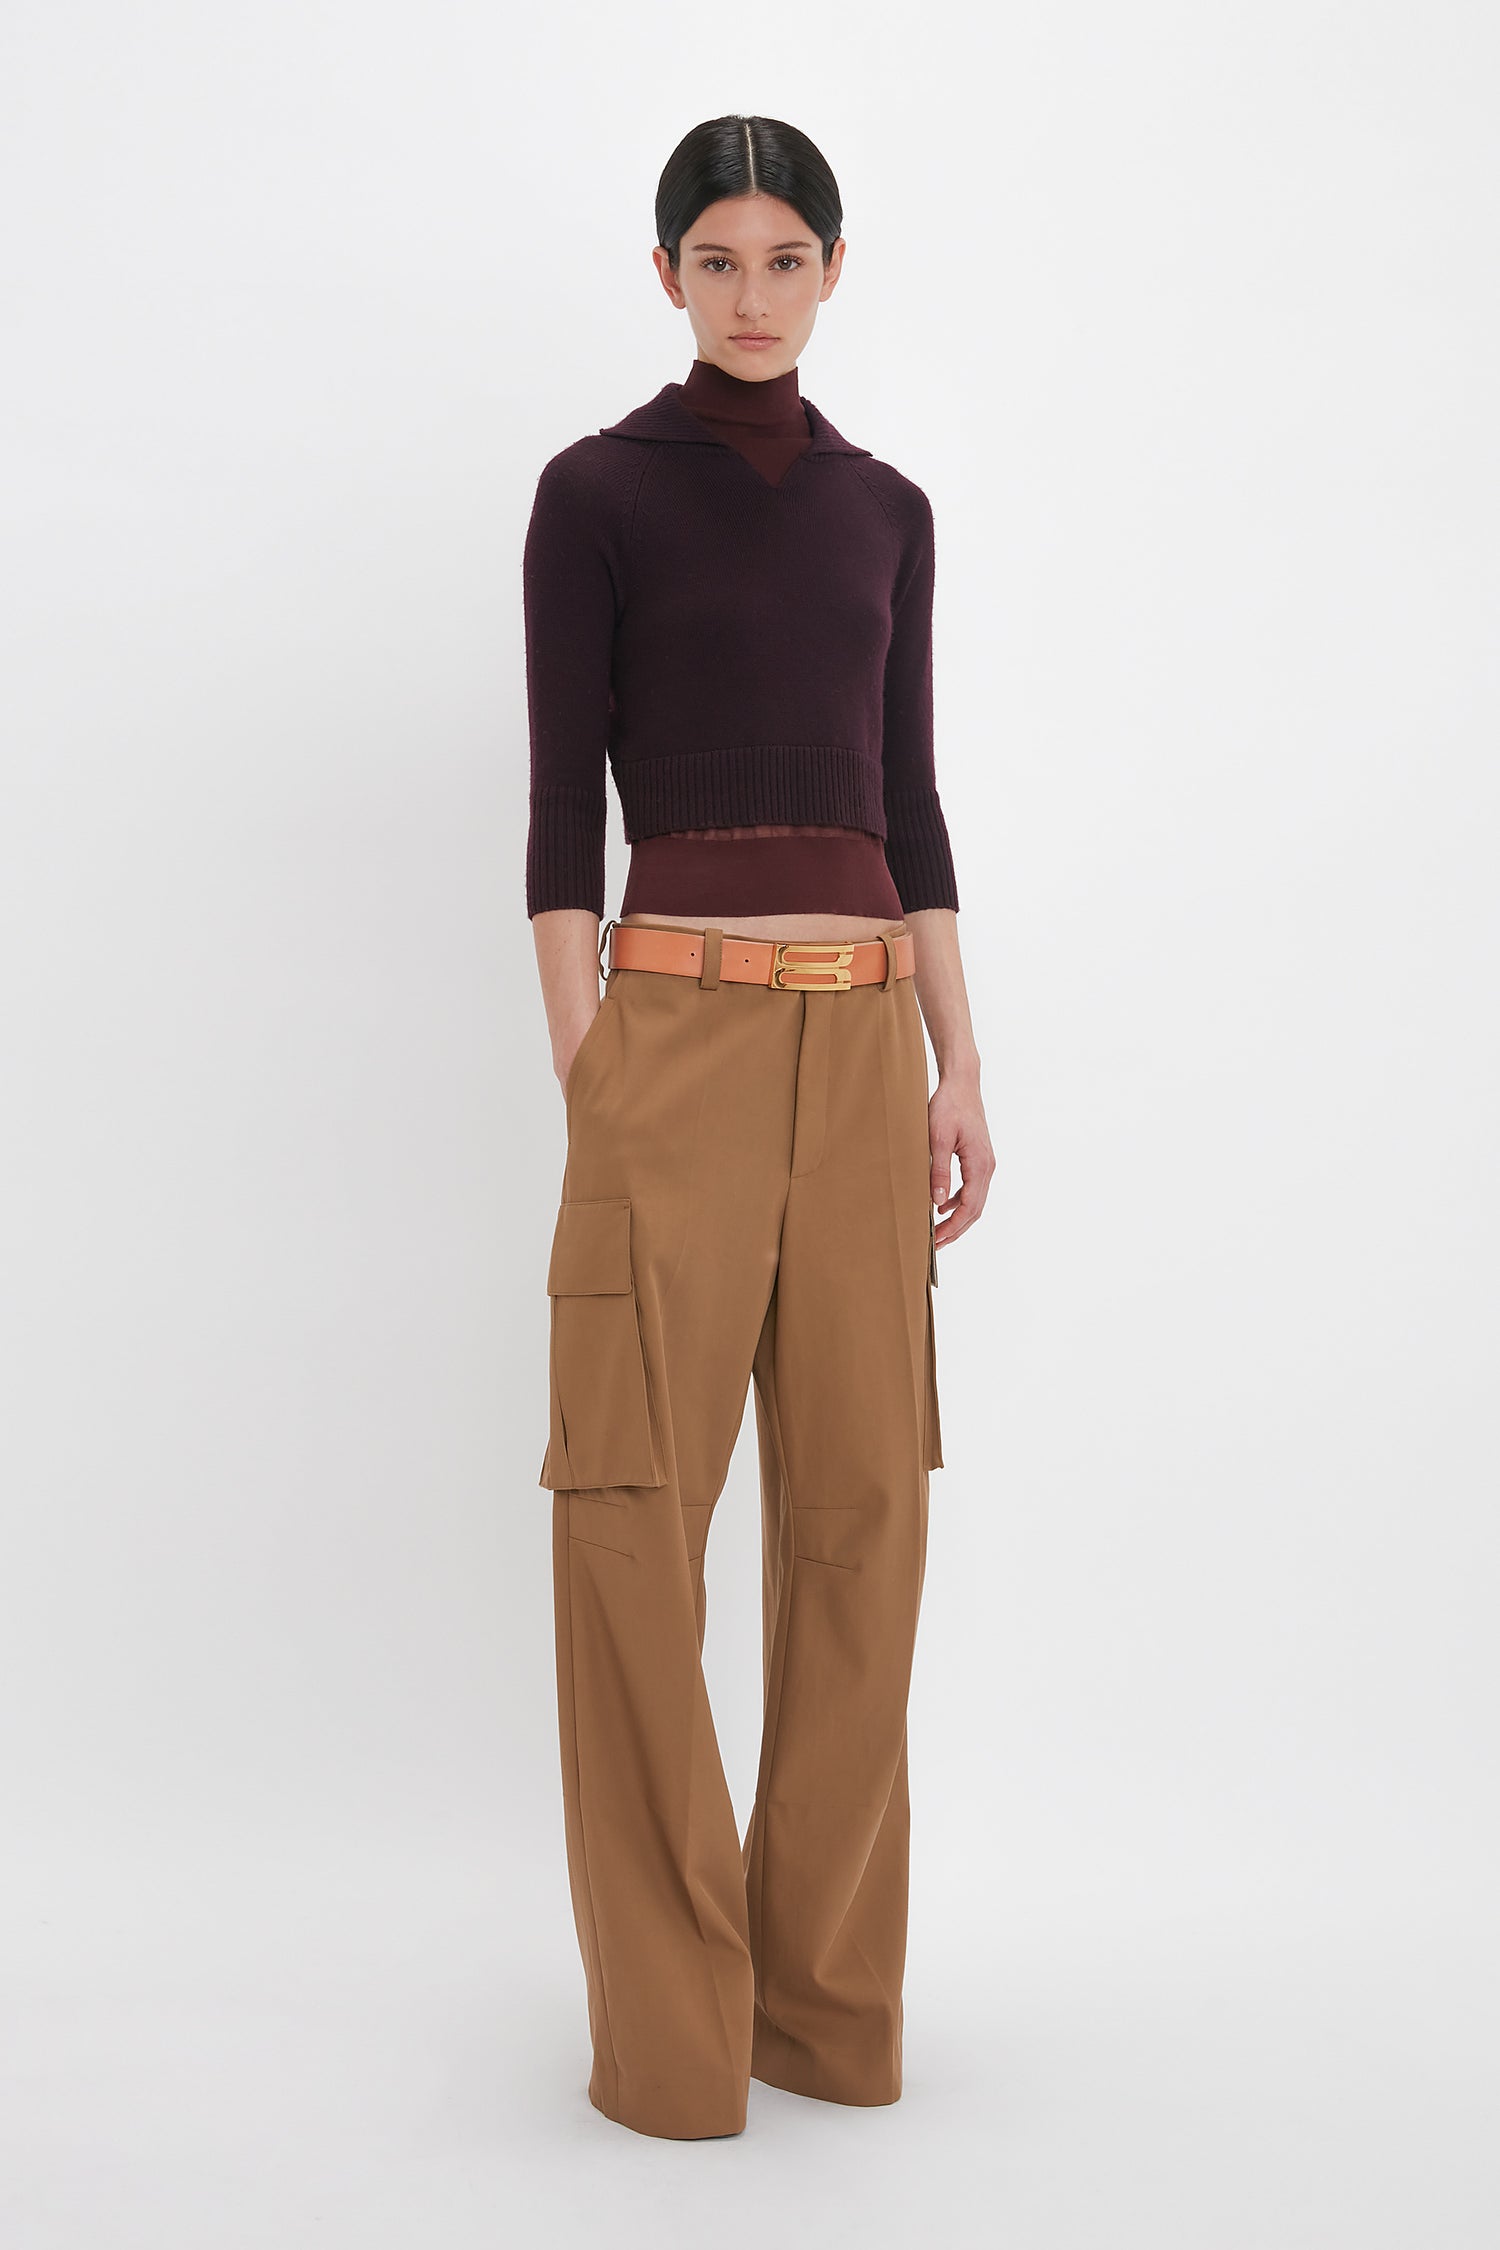 A person stands against a plain white background, wearing a dark maroon Wrap Detail Jumper In Brown by Victoria Beckham and light brown wide-leg cargo pants with a tan belt.